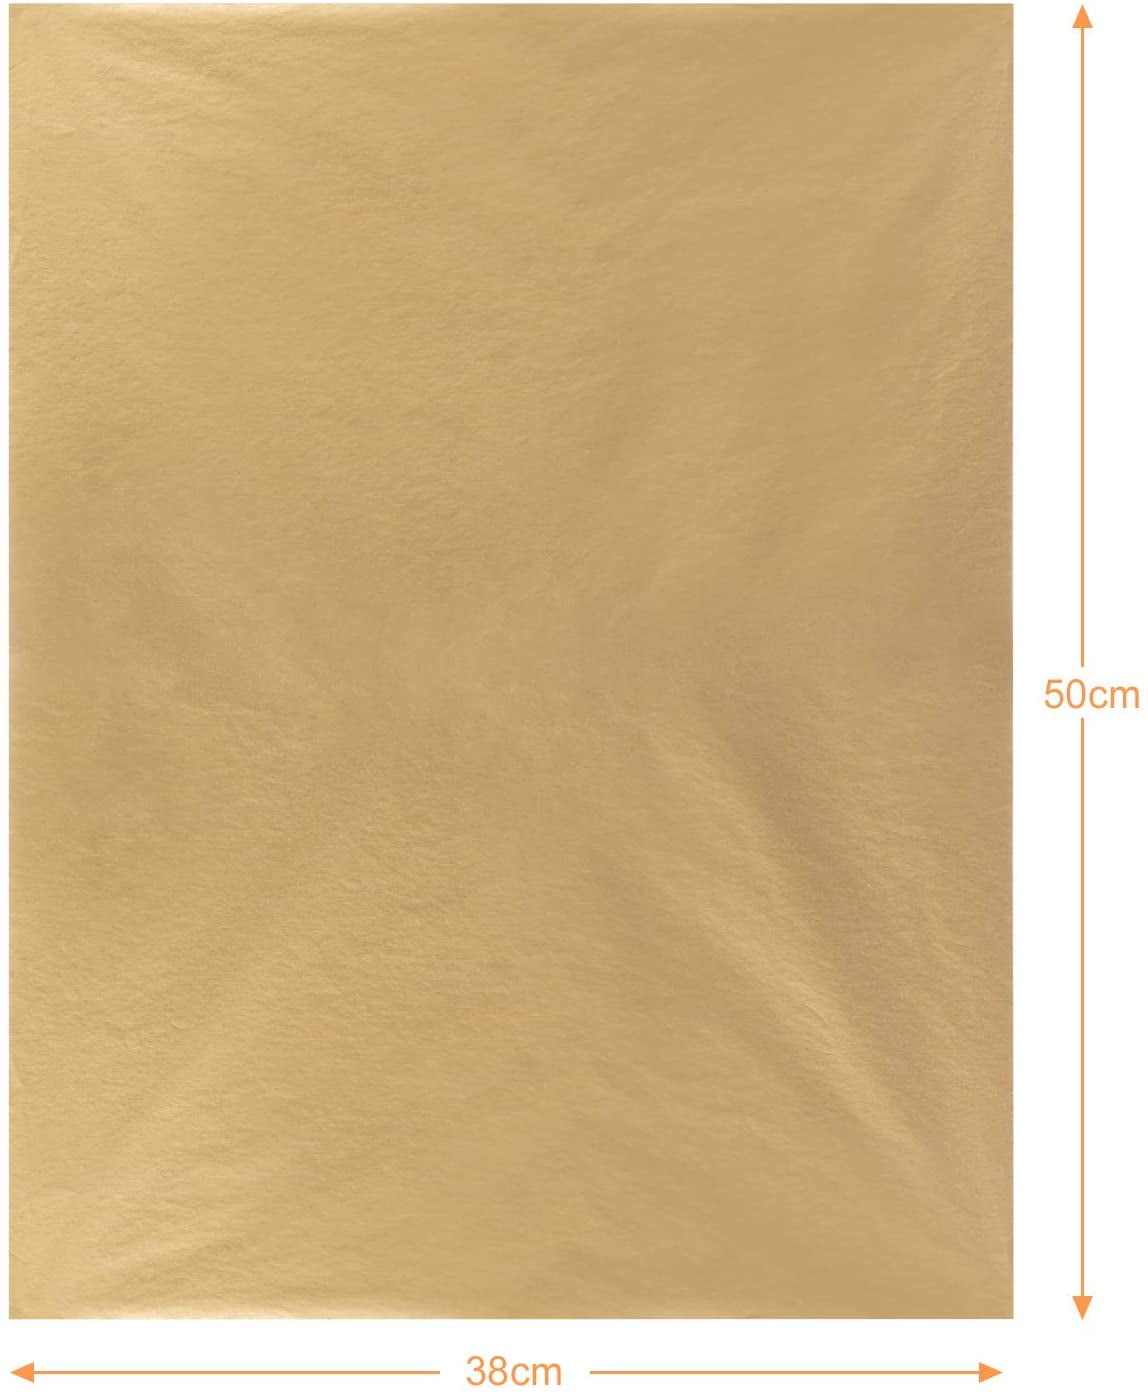 60 Sheets Metallic Gold Star Tissue Paper Bulk for Gift Wrapping Bags –  Sparkle and Bash